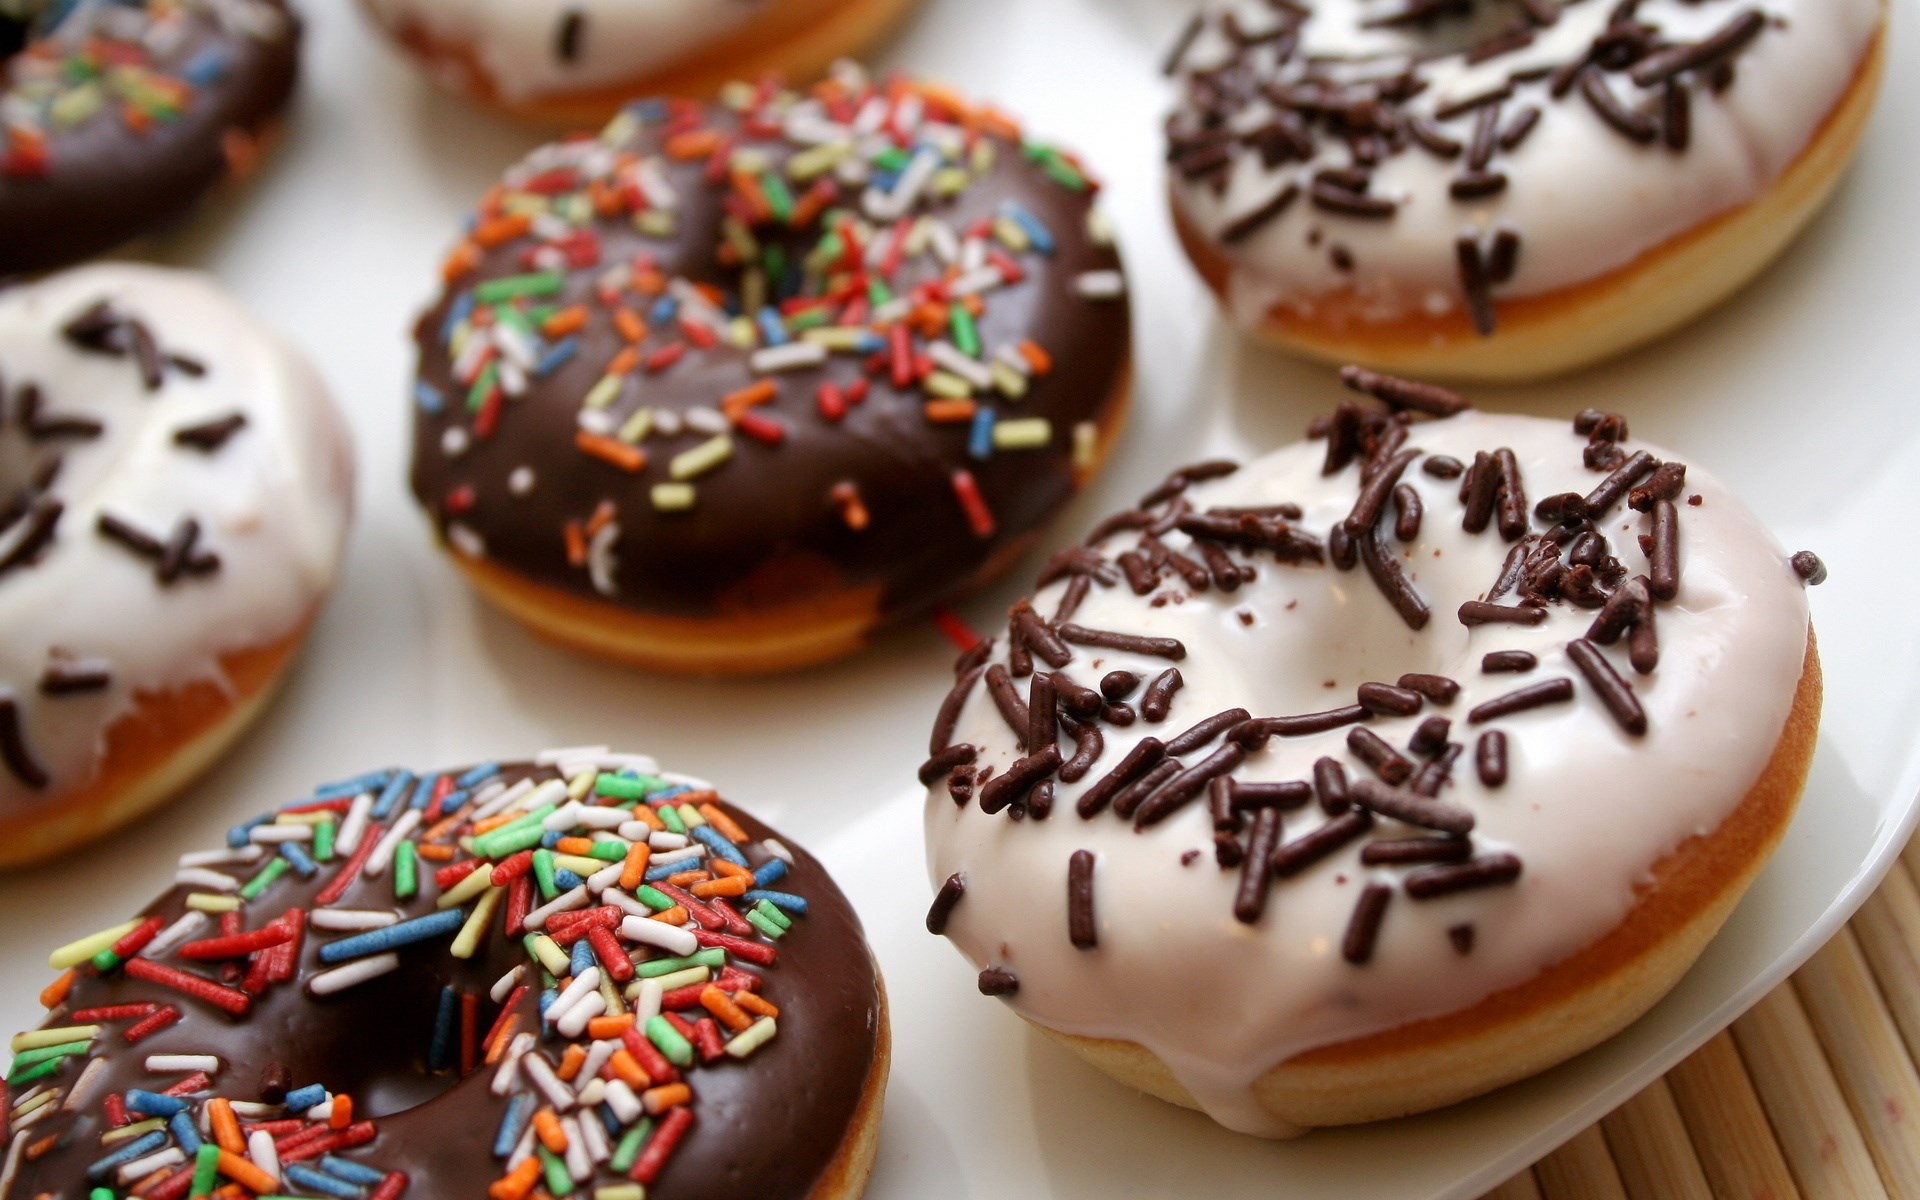 Donut: Contains a high level of fat and carbohydrate. 1920x1200 HD Wallpaper.